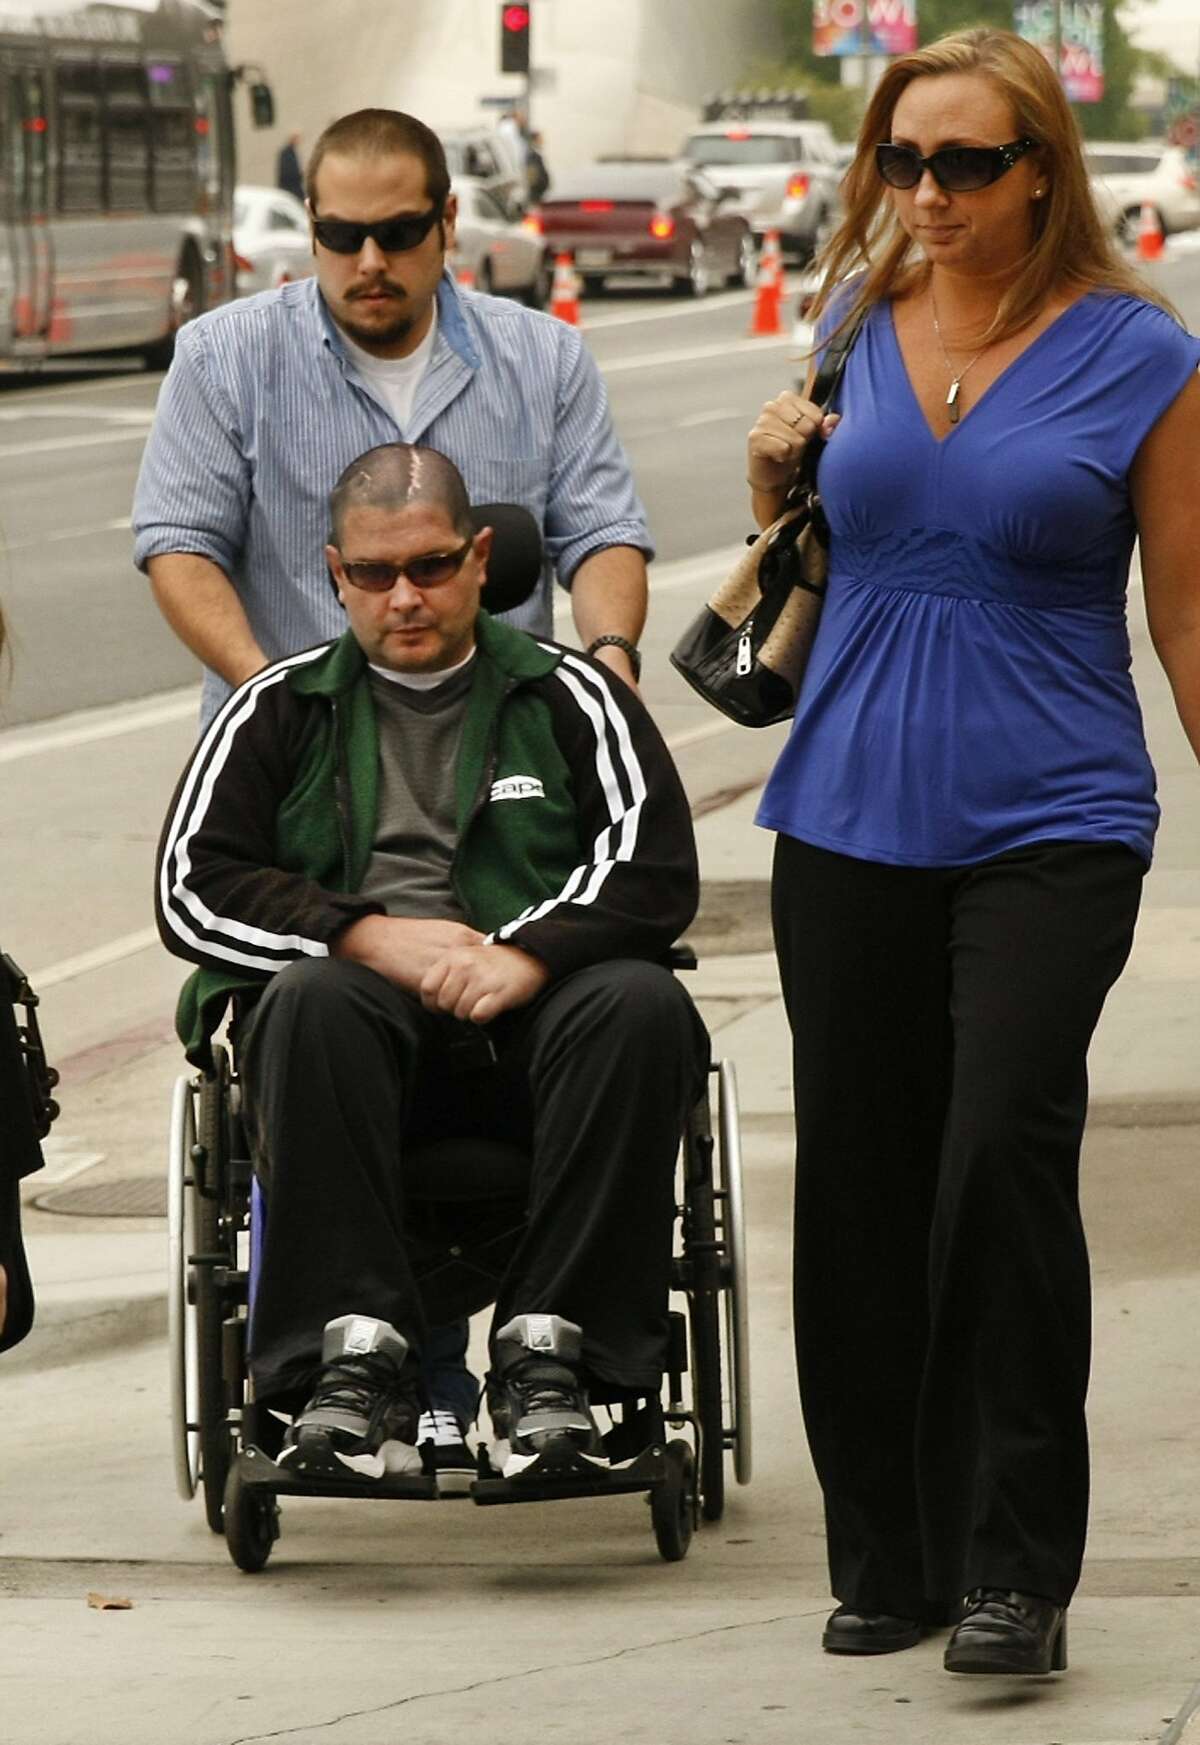 A wheelchair-bound Bryan Stow, assisted by a caregiver, is joined by family members as he enters the Los Angeles County Superior Courthouse on Wednesday, May 28, 2014, as jury selection continued into a second day for the trial of Bryan Stow's lawsuit against former Los Angeles Dodgers owner Frank McCourt and three team entities he created. (Al Seib/Los Angeles Times/MCT)